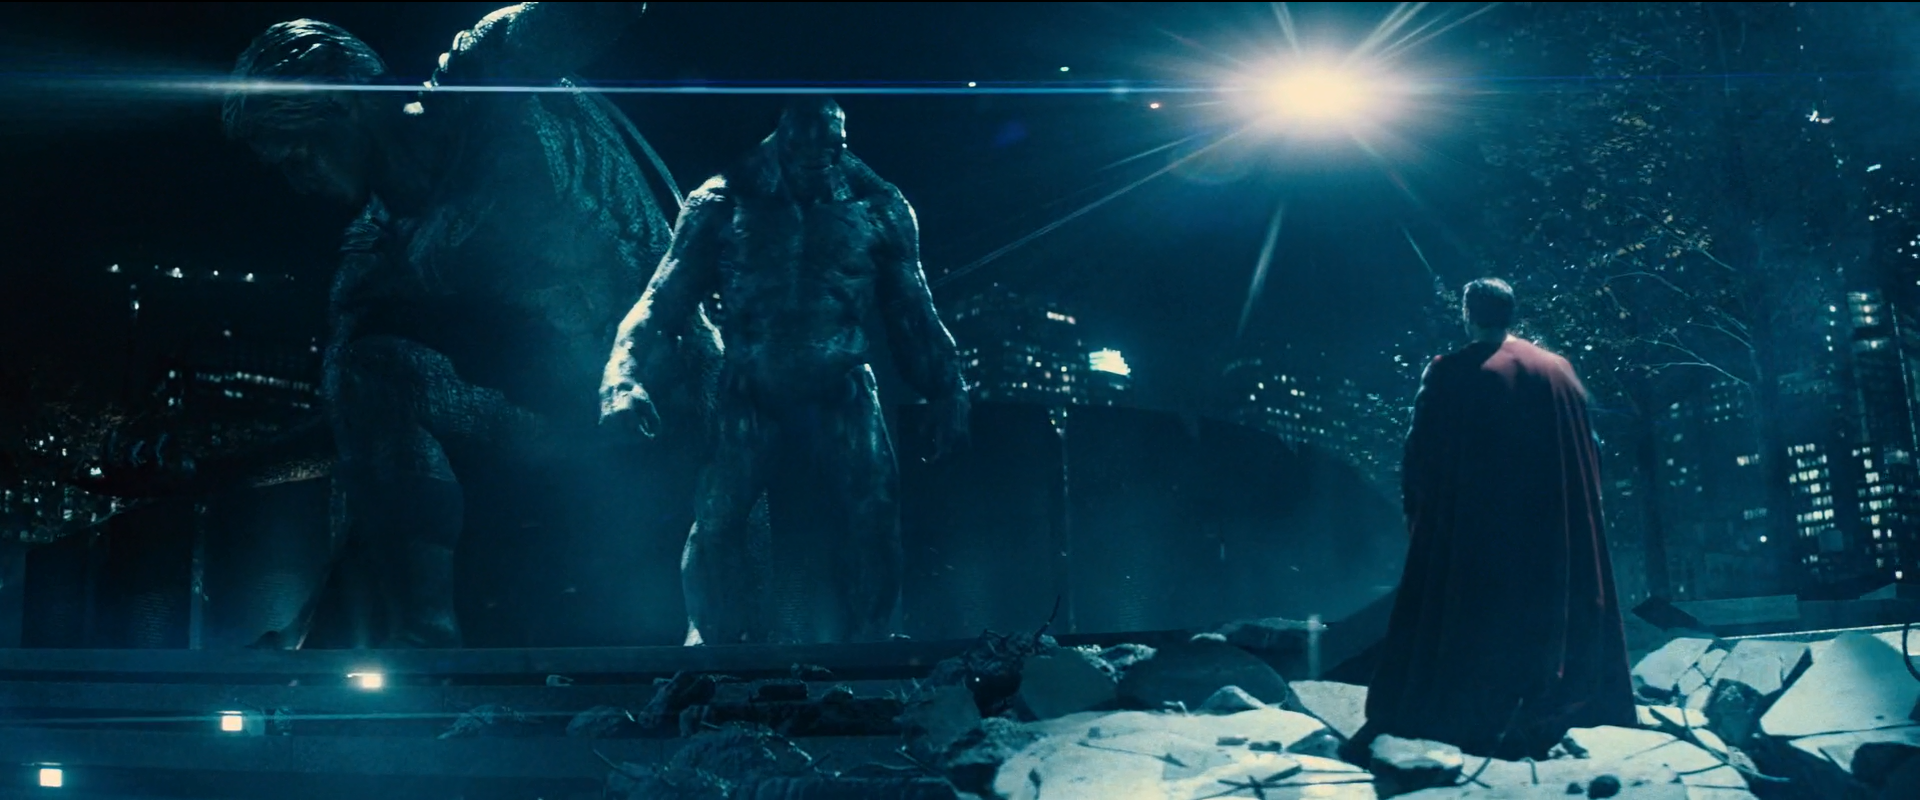 Doomsday | DC Extended Universe Wiki | Fandom